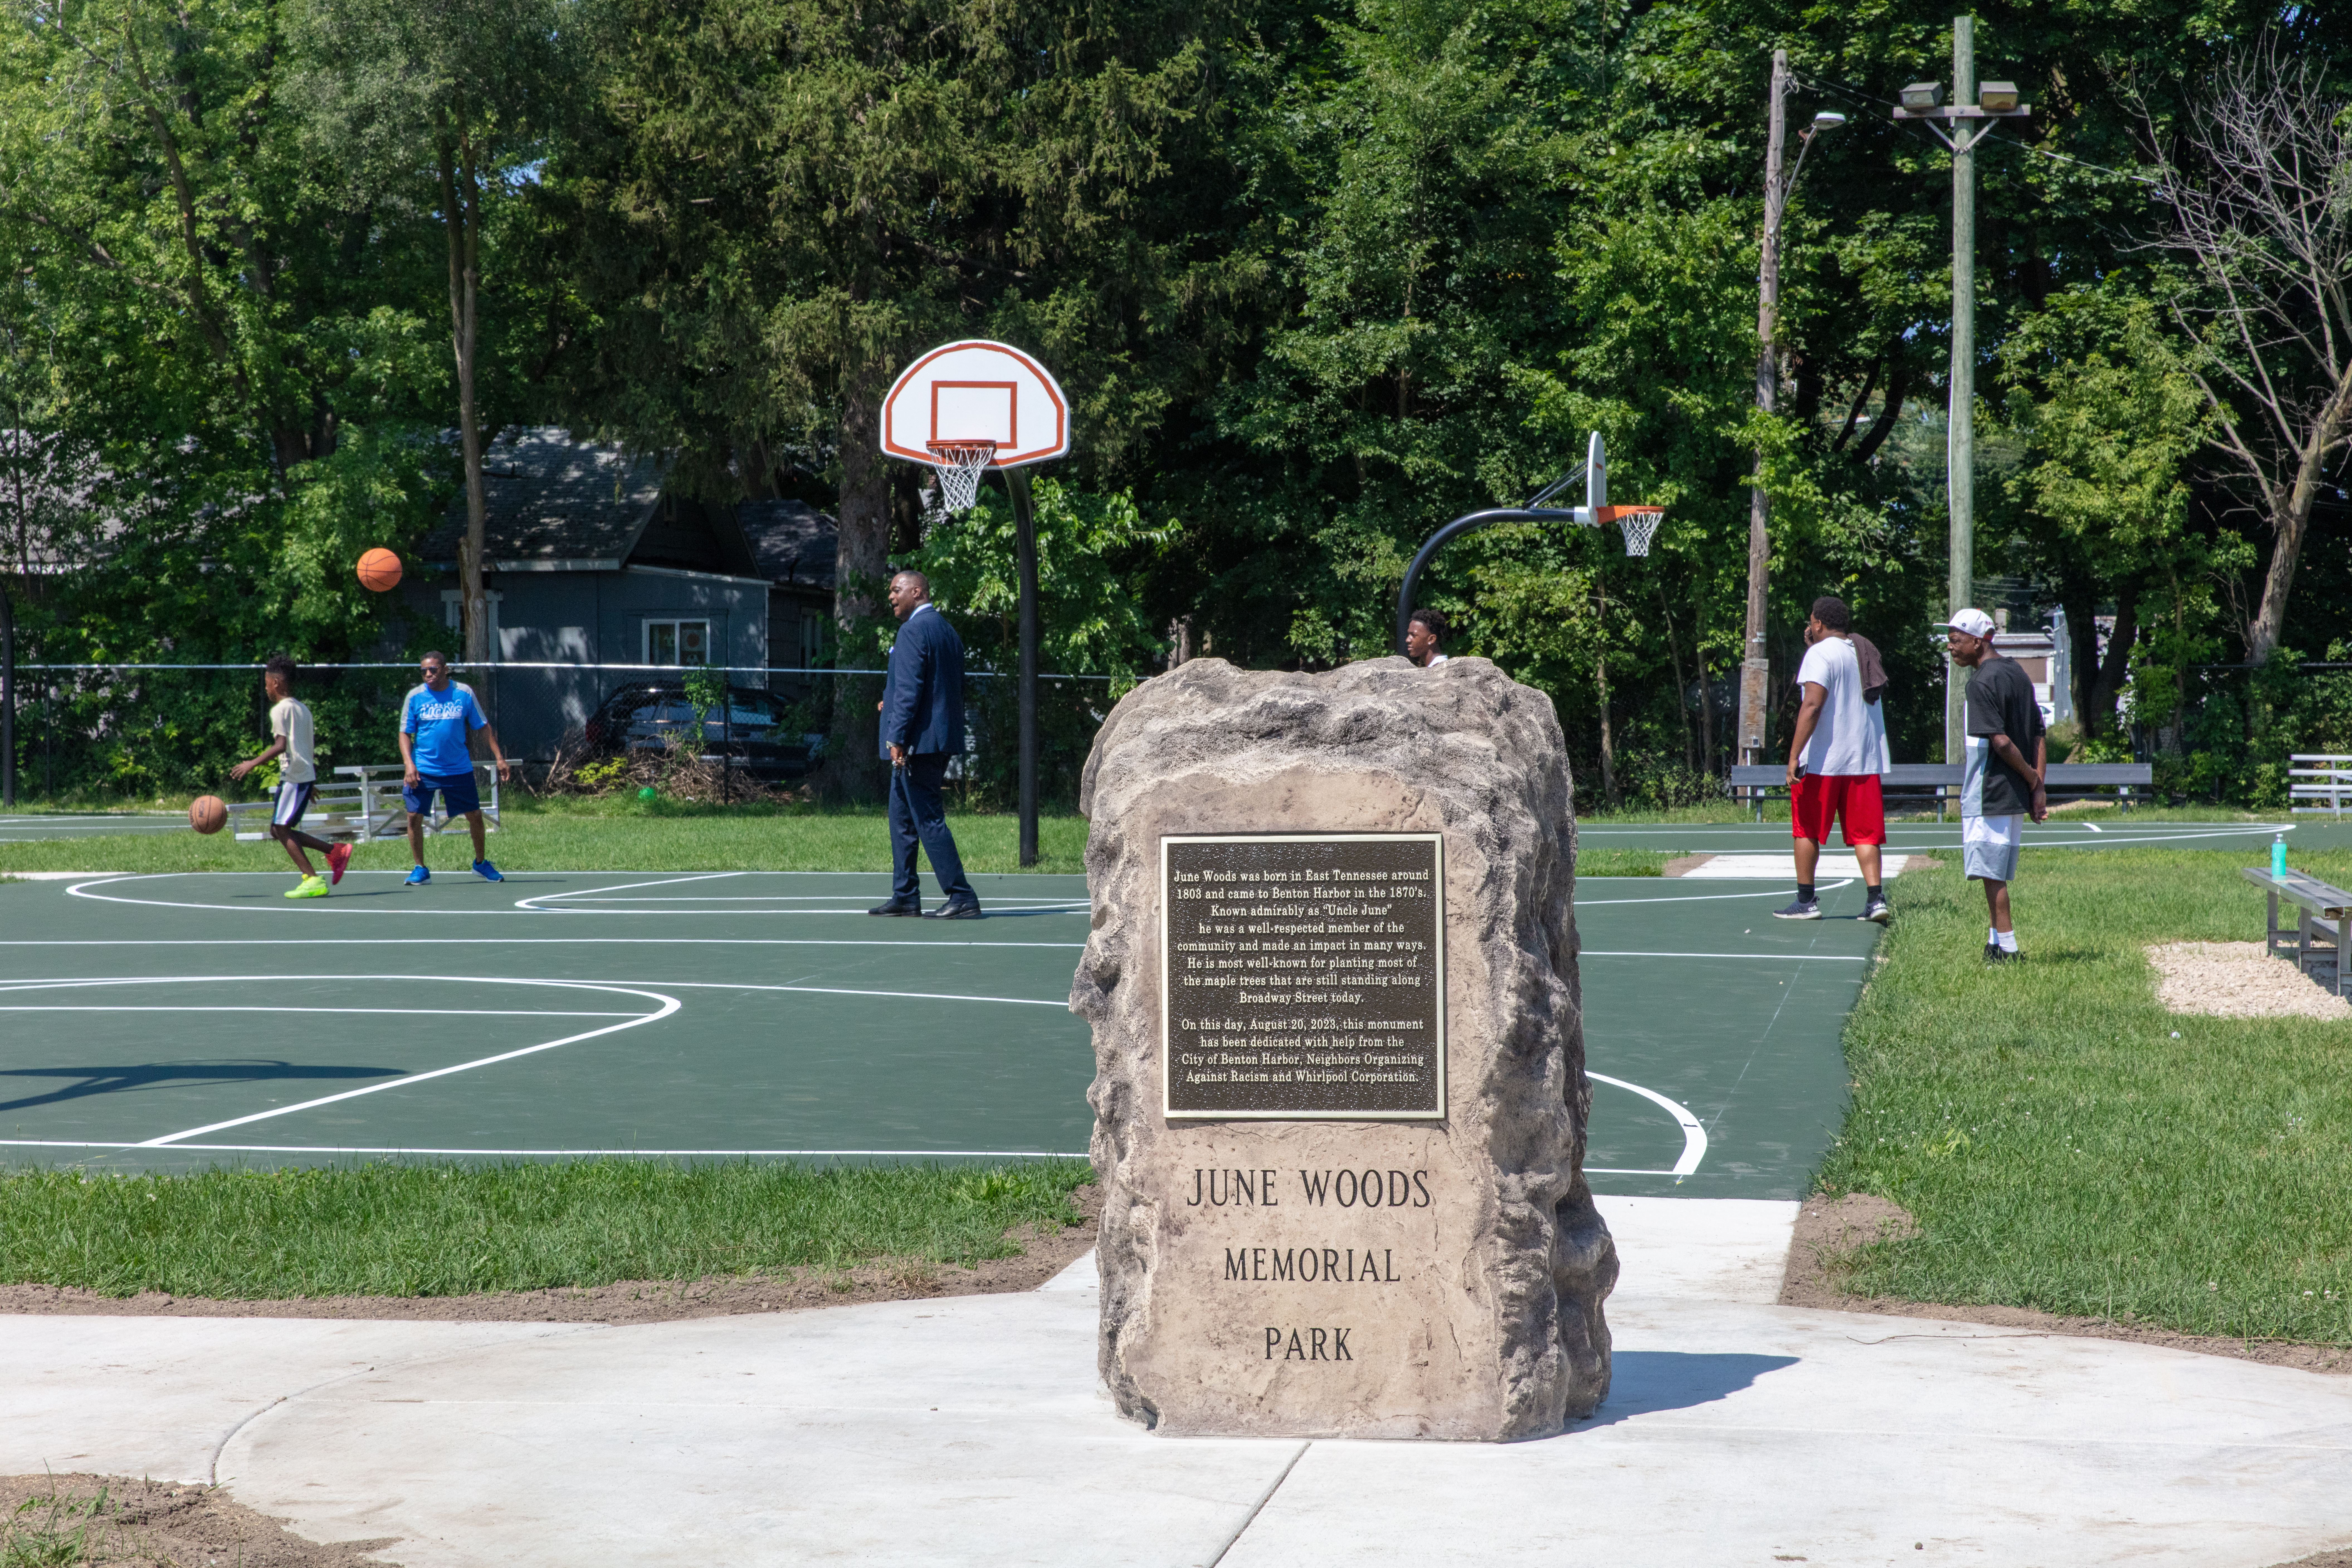 June Woods dedication within the beautifully renovated park